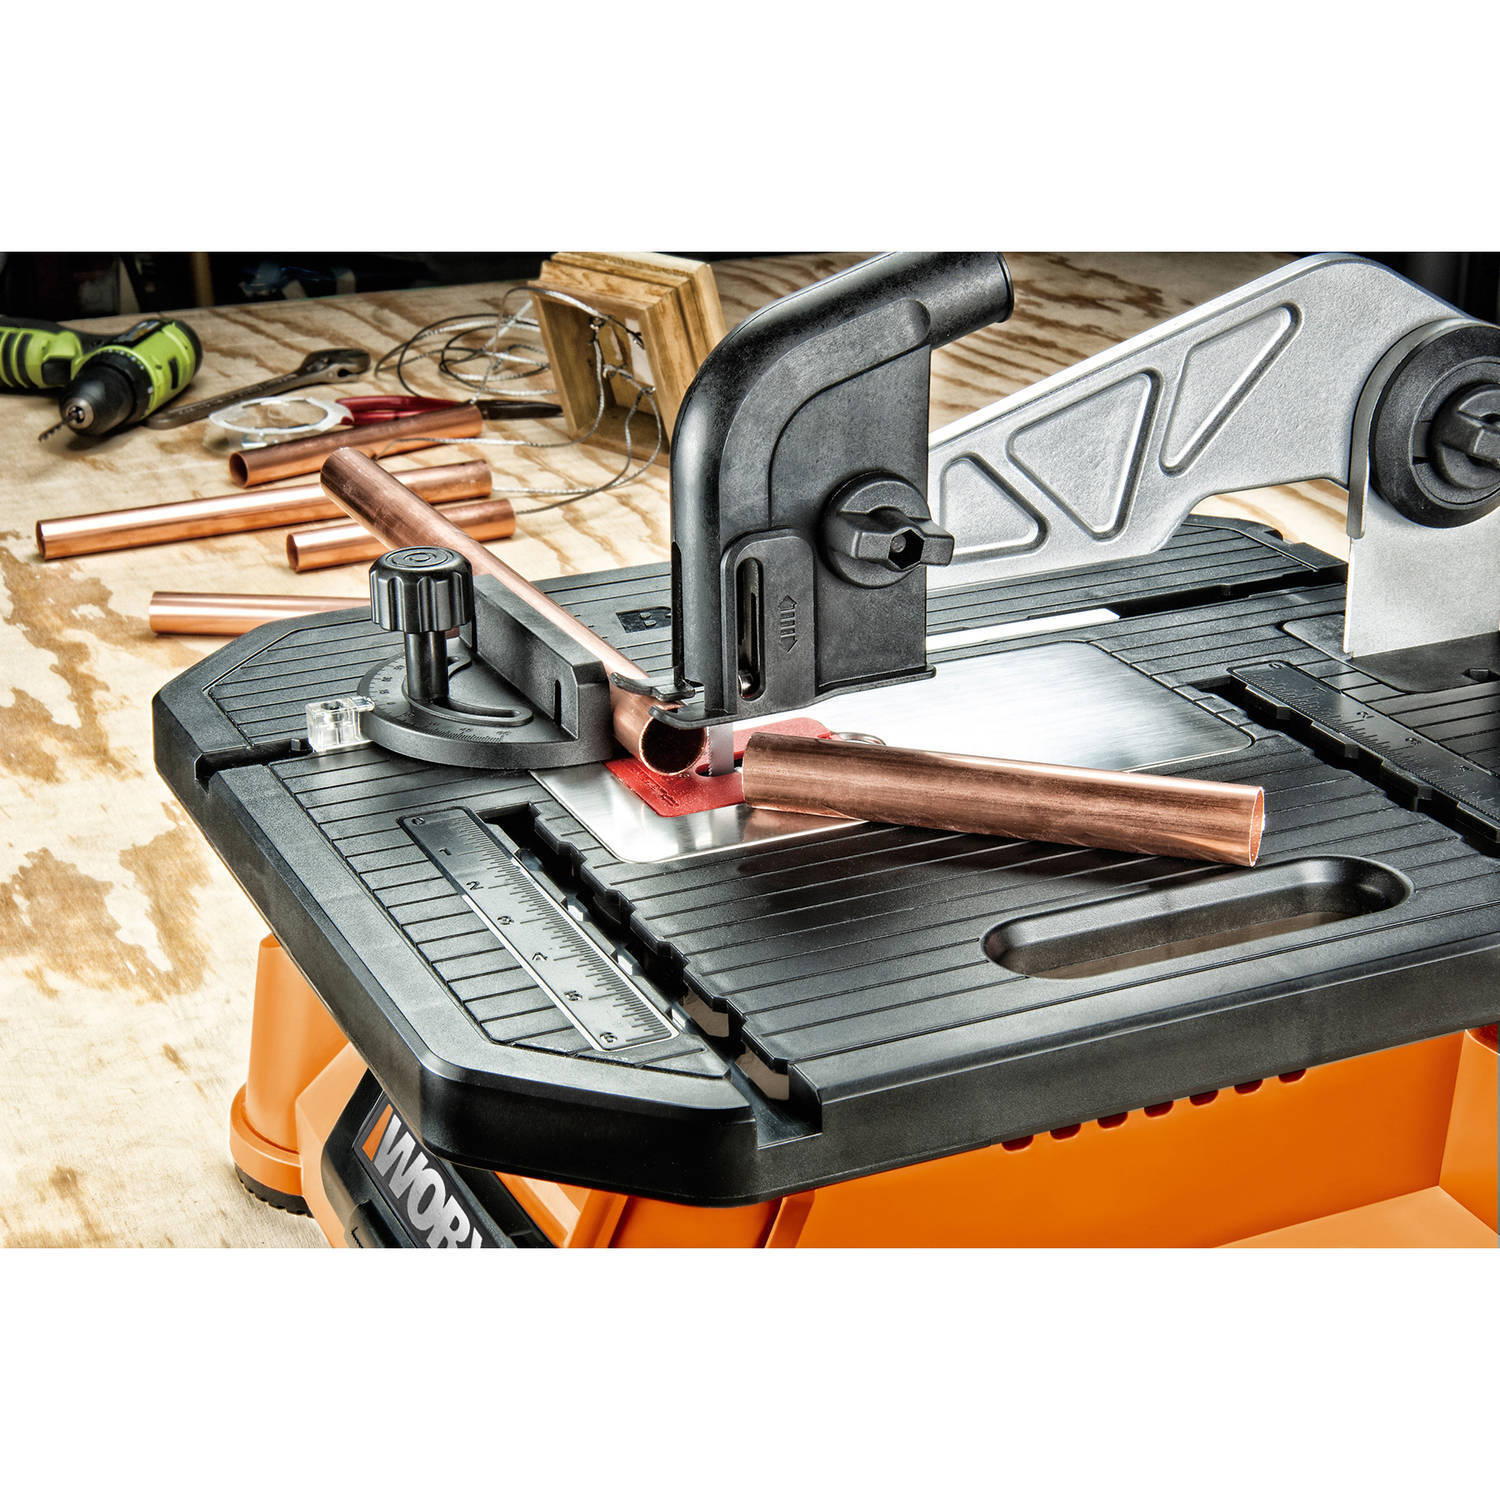 WORX BladeRunner x2 Portable Tabletop Saw # WX572L - image 3 of 7